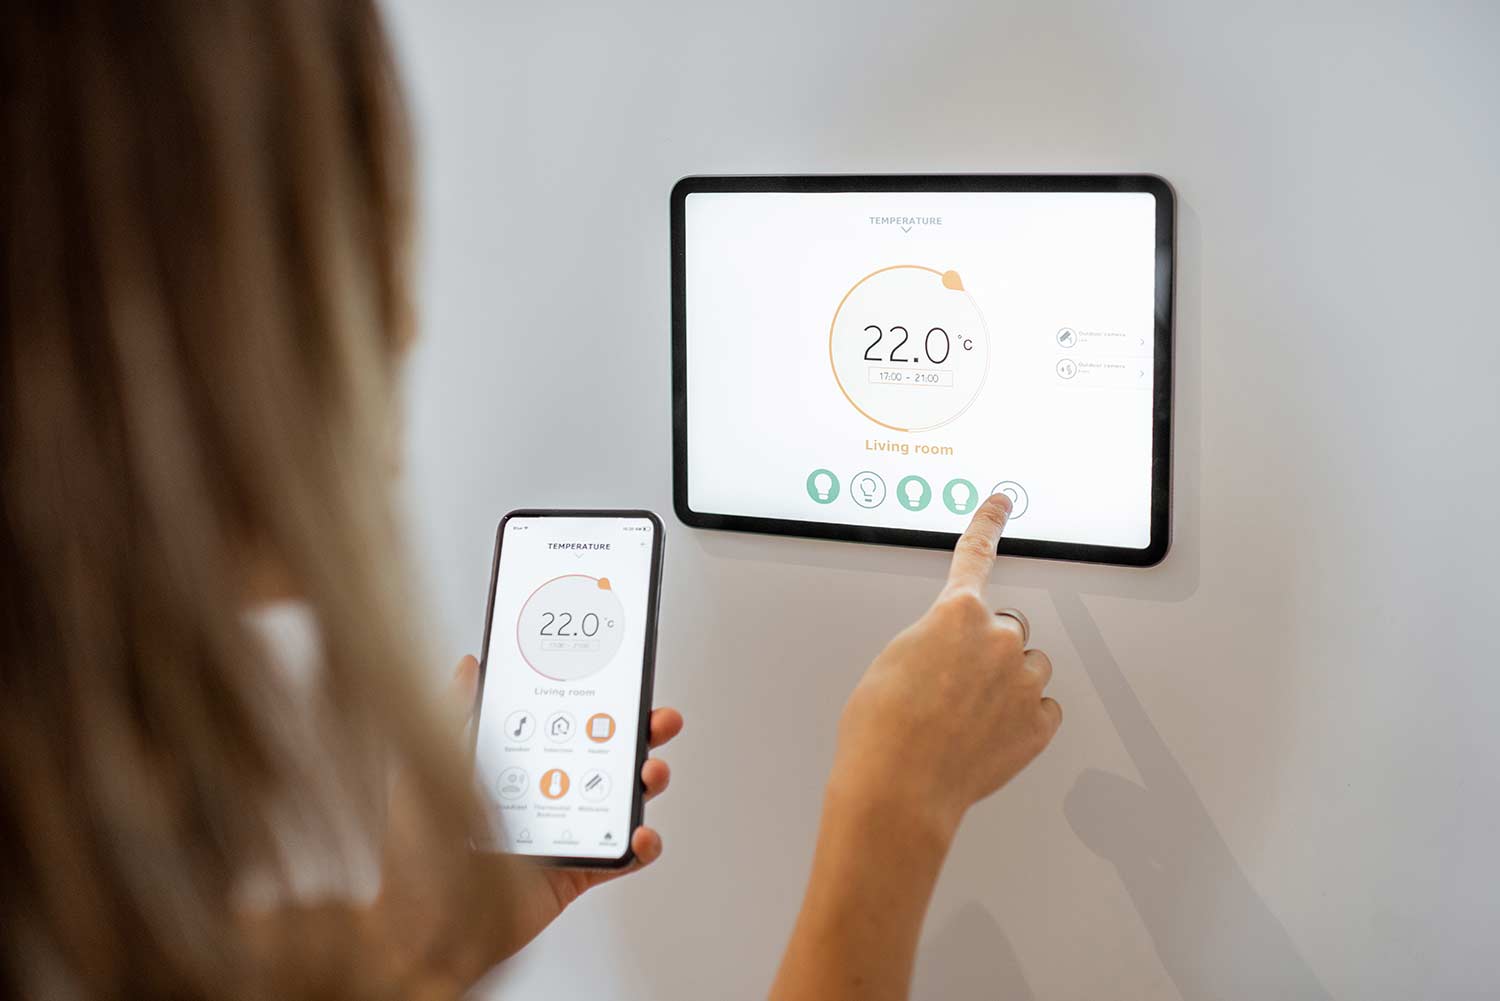 A smart thermostat can help keep your home at the perfect temperature depending on the time of day or year.